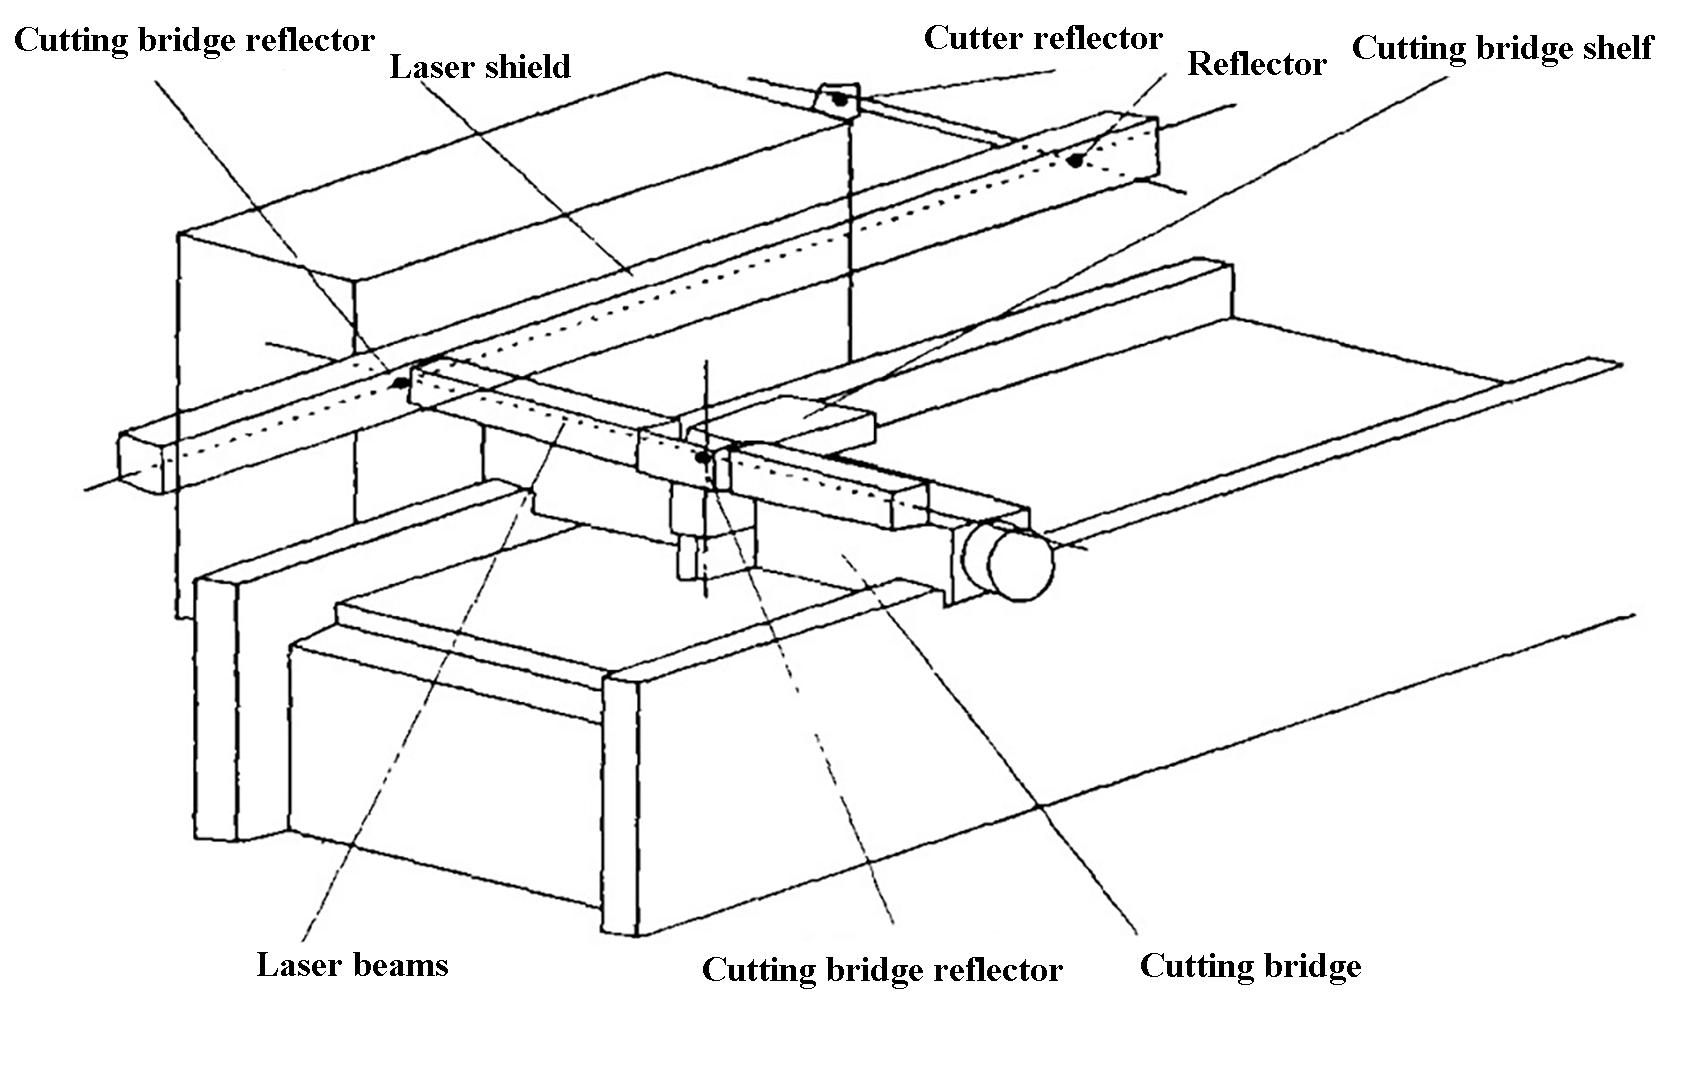 Fig. 1 Optical structure diagram of Bystronic laser cutting machine